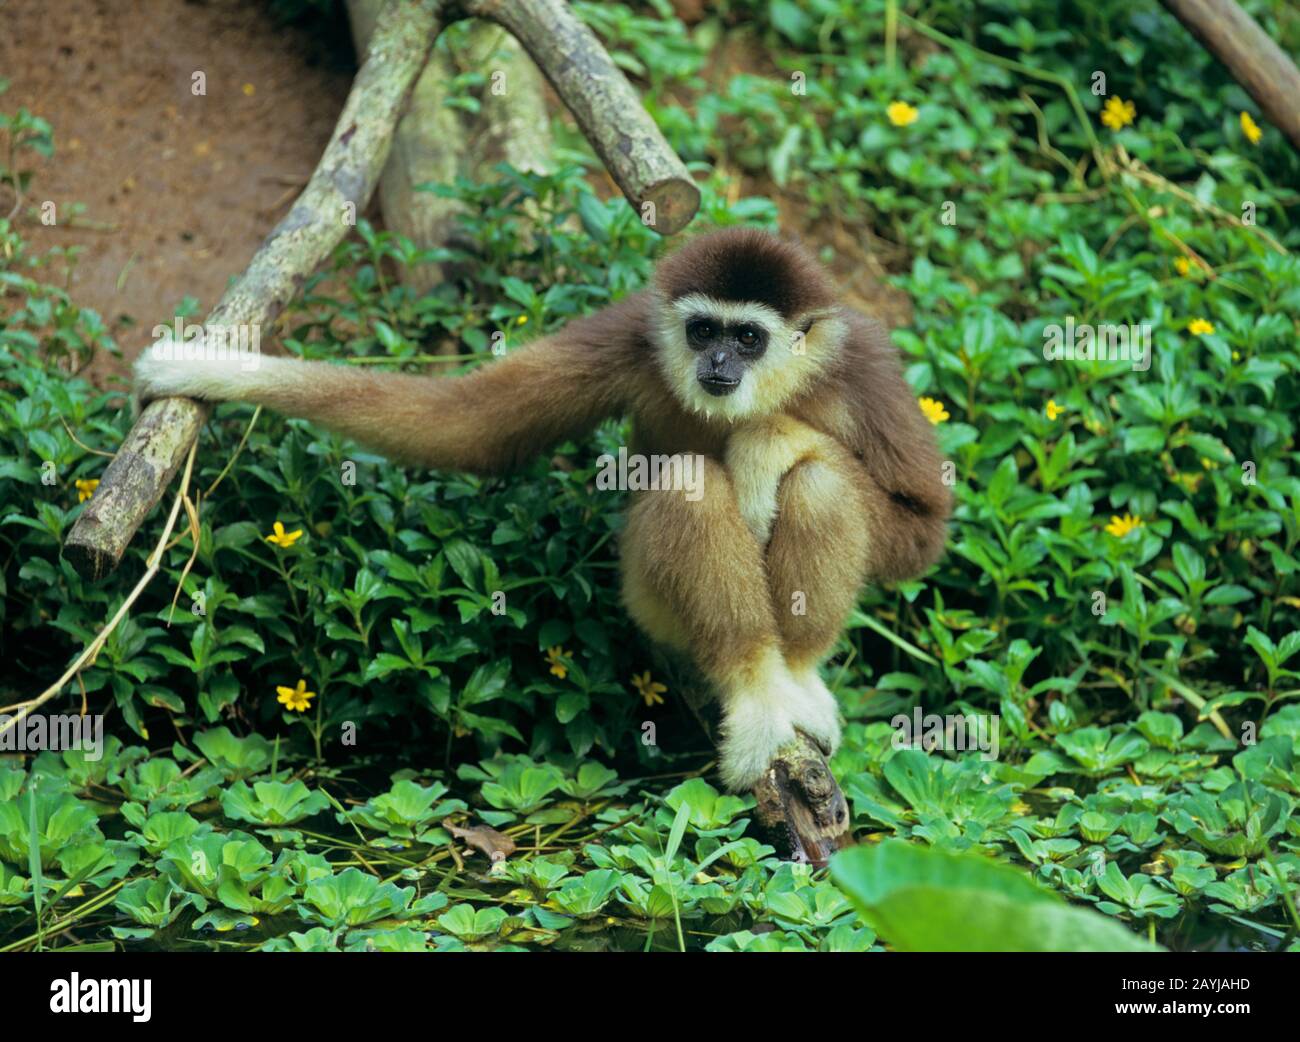 dark-handed gibbon, black-handed Gibbon, agile gibbon (Hylobates agilis), sitting on a branch at the waterside, front view Stock Photo